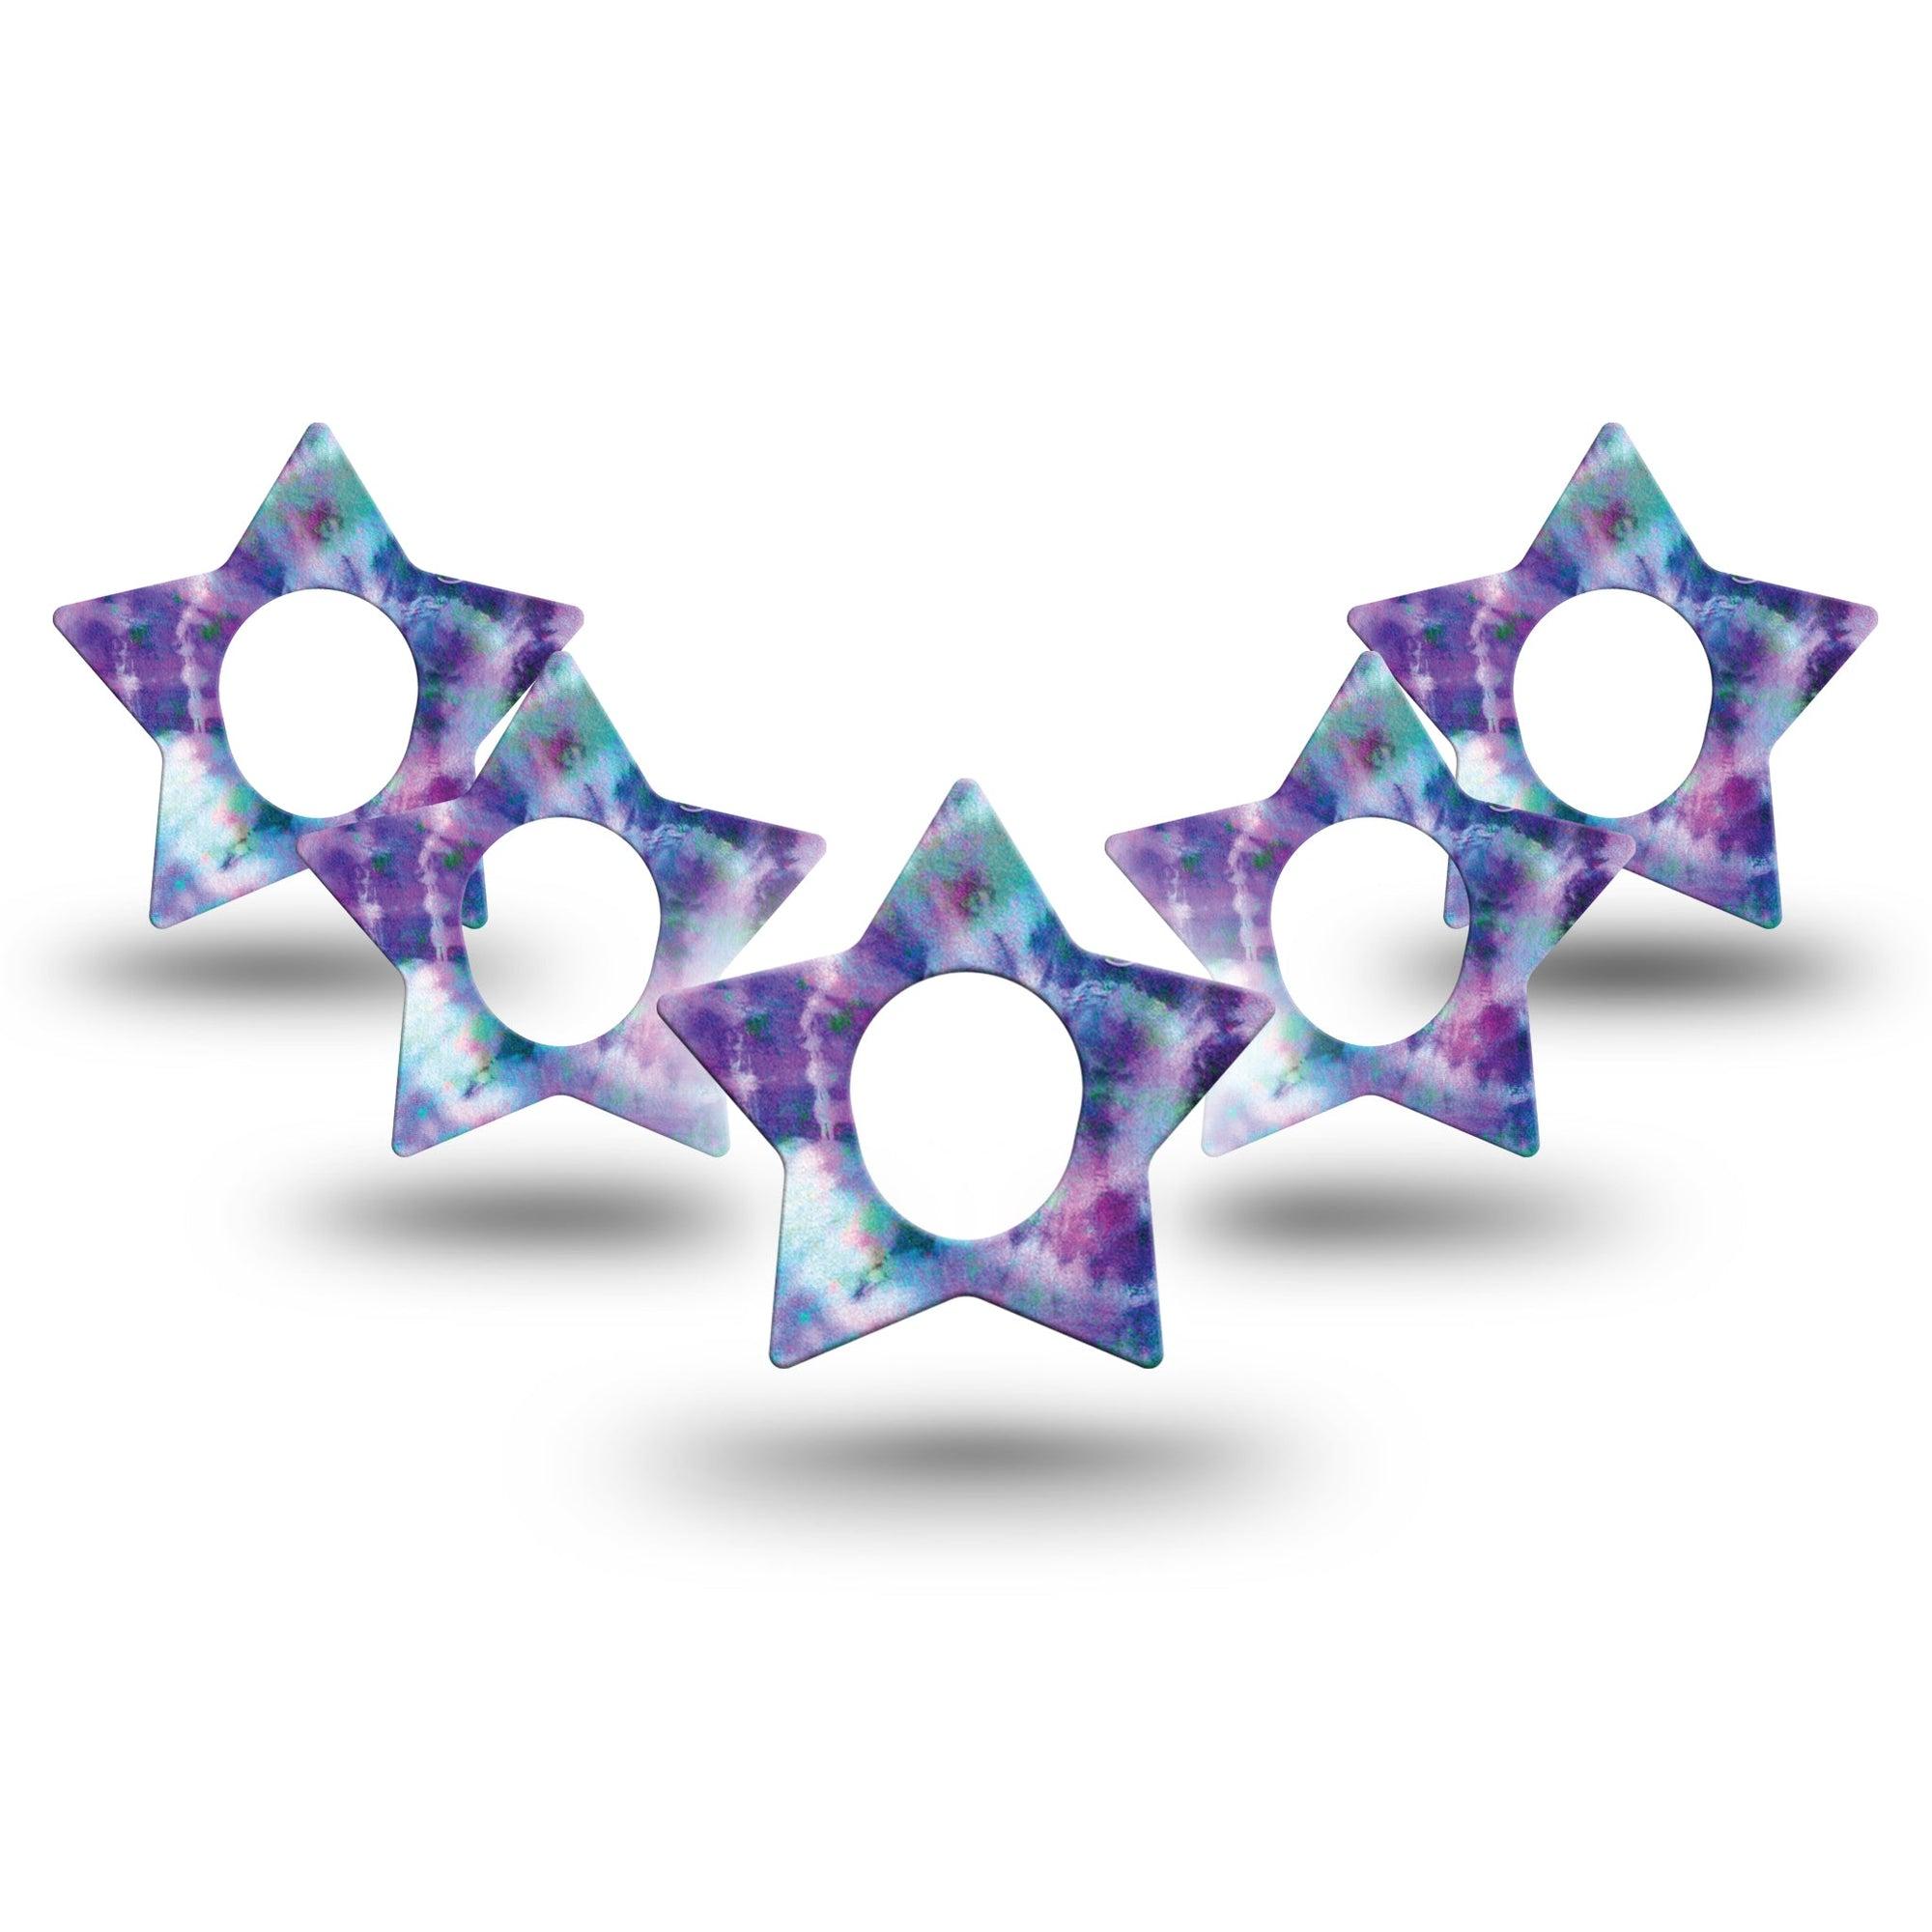 ExpressionMed Purple Tie Dye Star Dexcom G7 Tape, 5-Pack, Tie Dye Design Inspired, CGM Overlay Patch Design